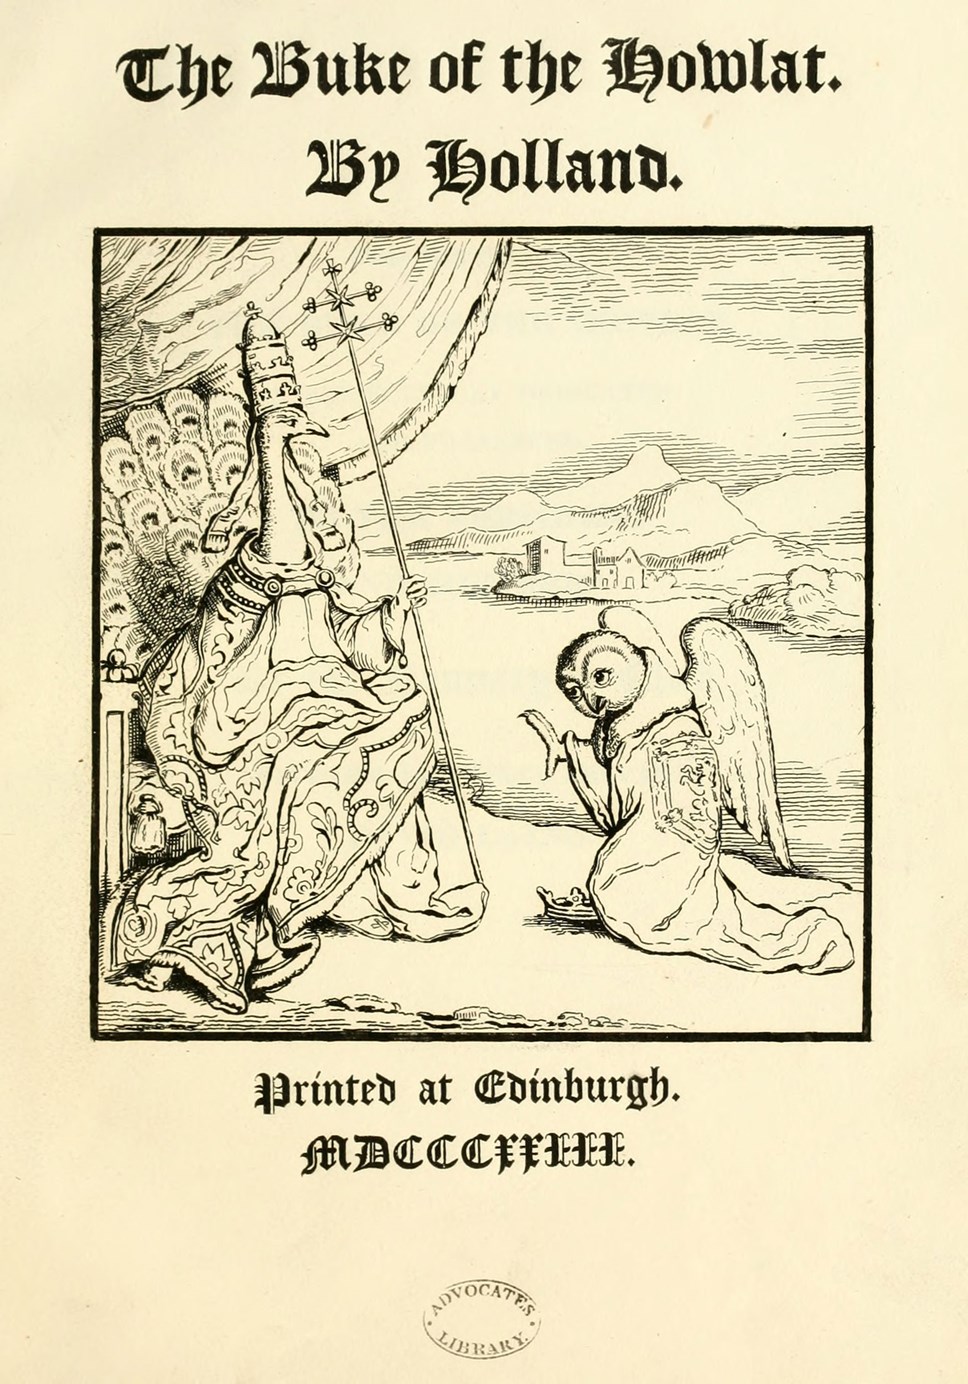 Cover of The Buke of the Howlat, a humourous 15th century poem in Scots